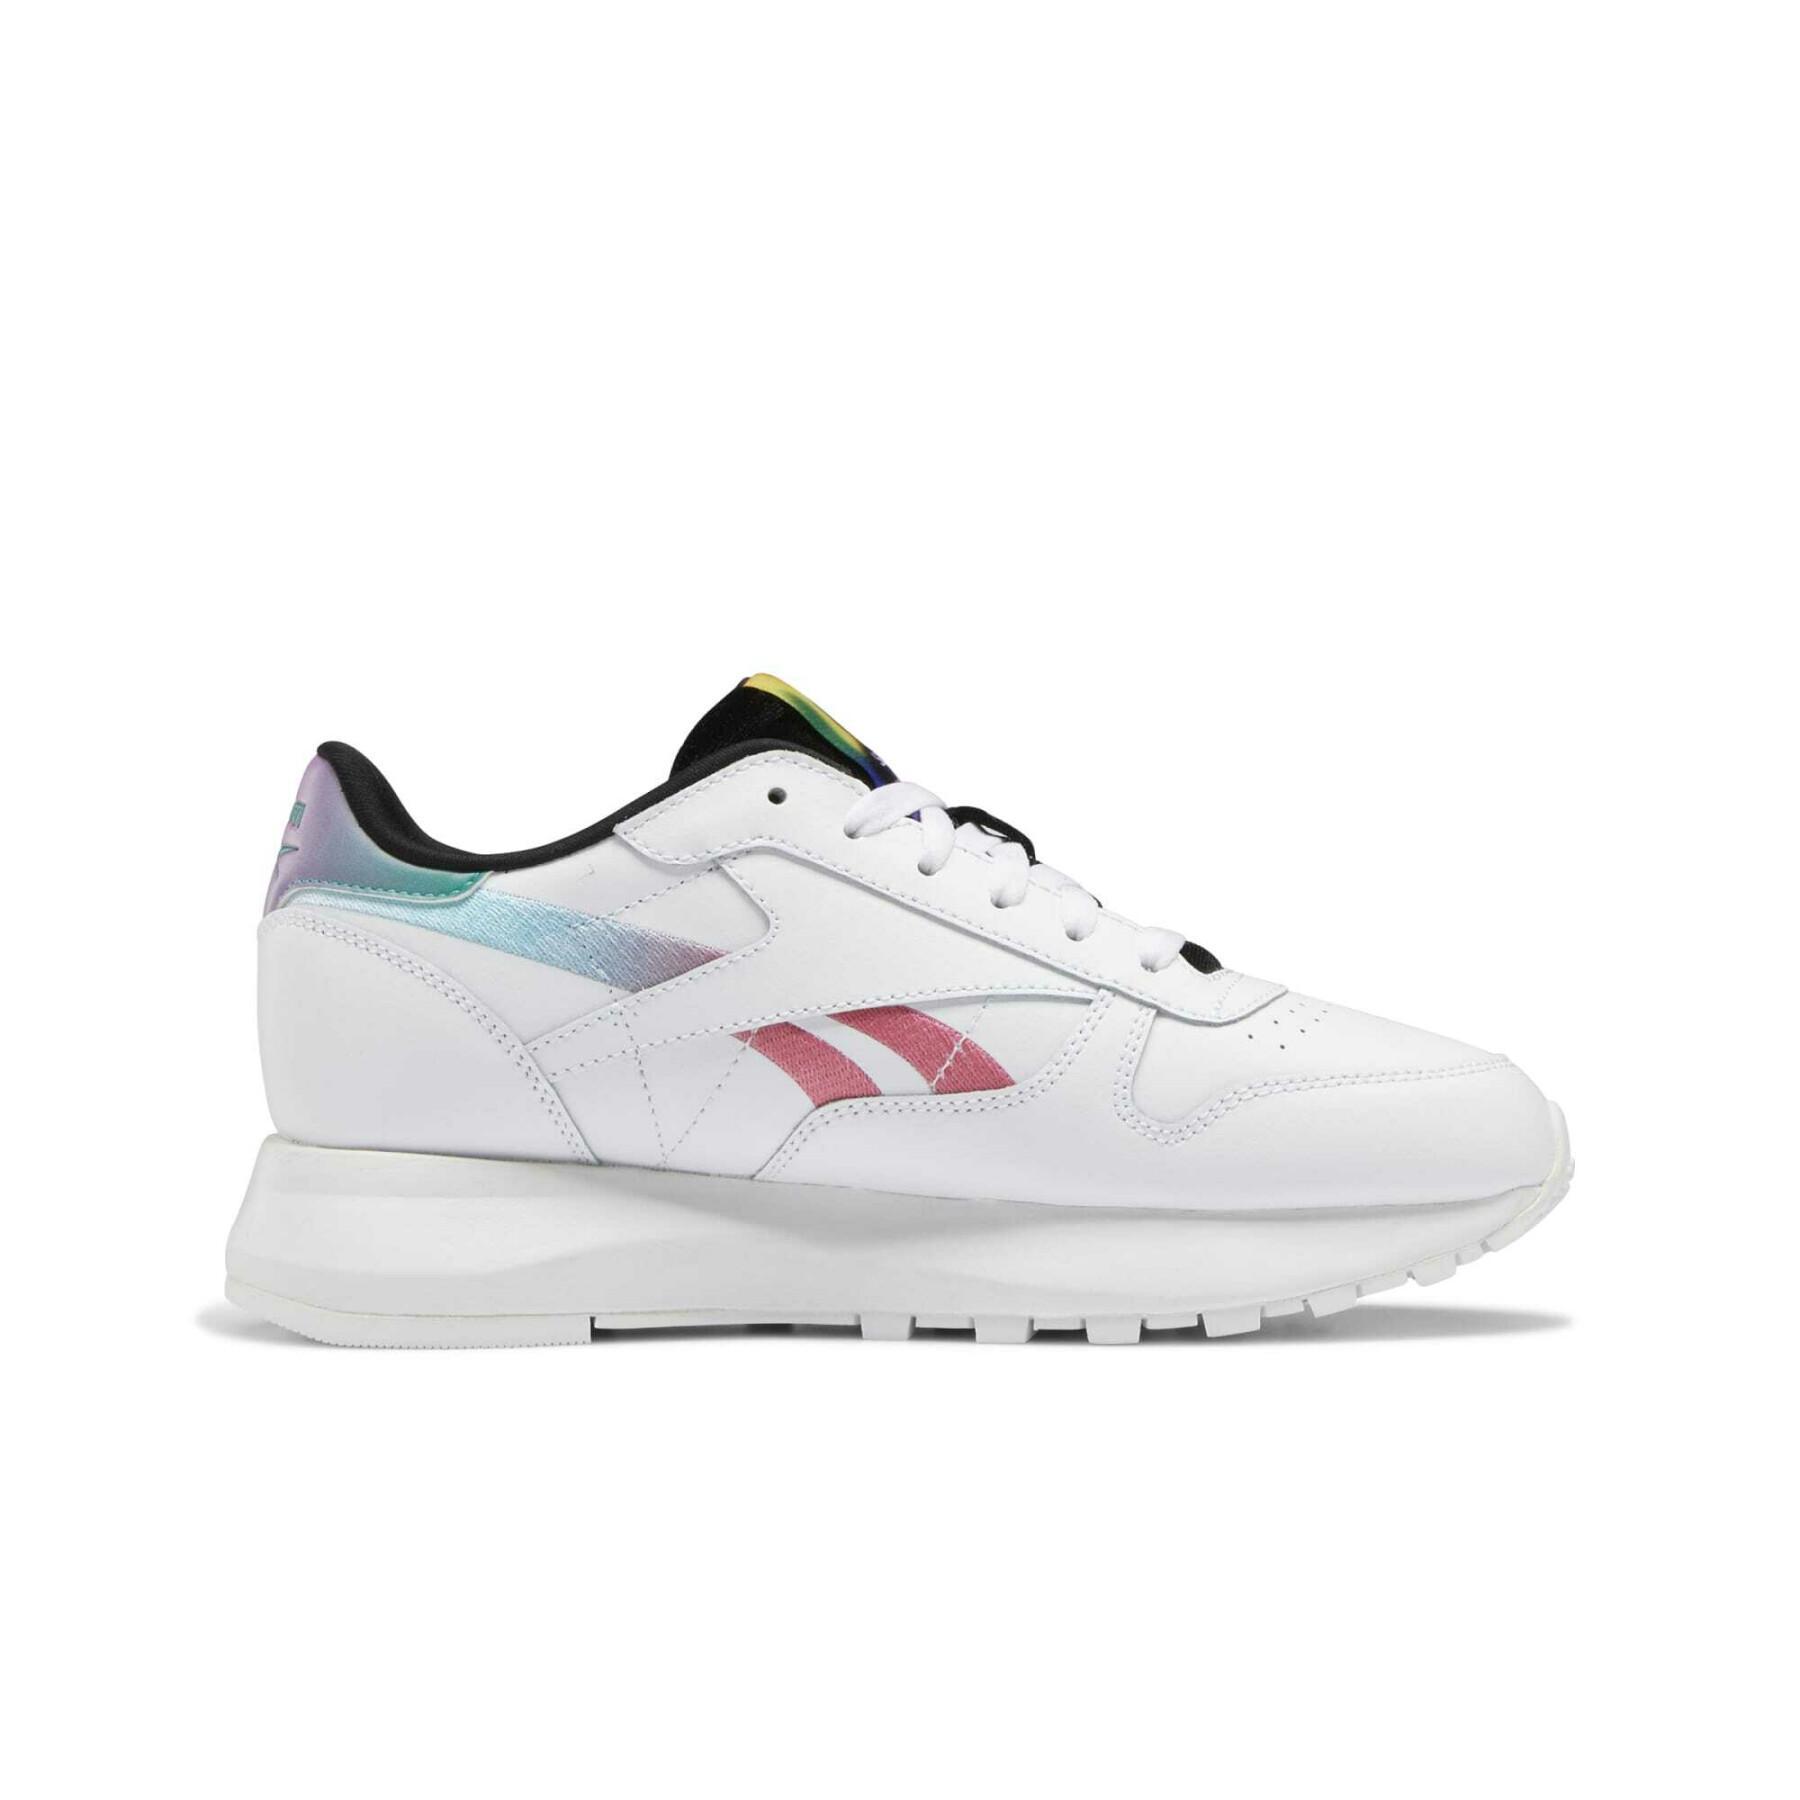 Leather sneakers for women Reebok Classic SP